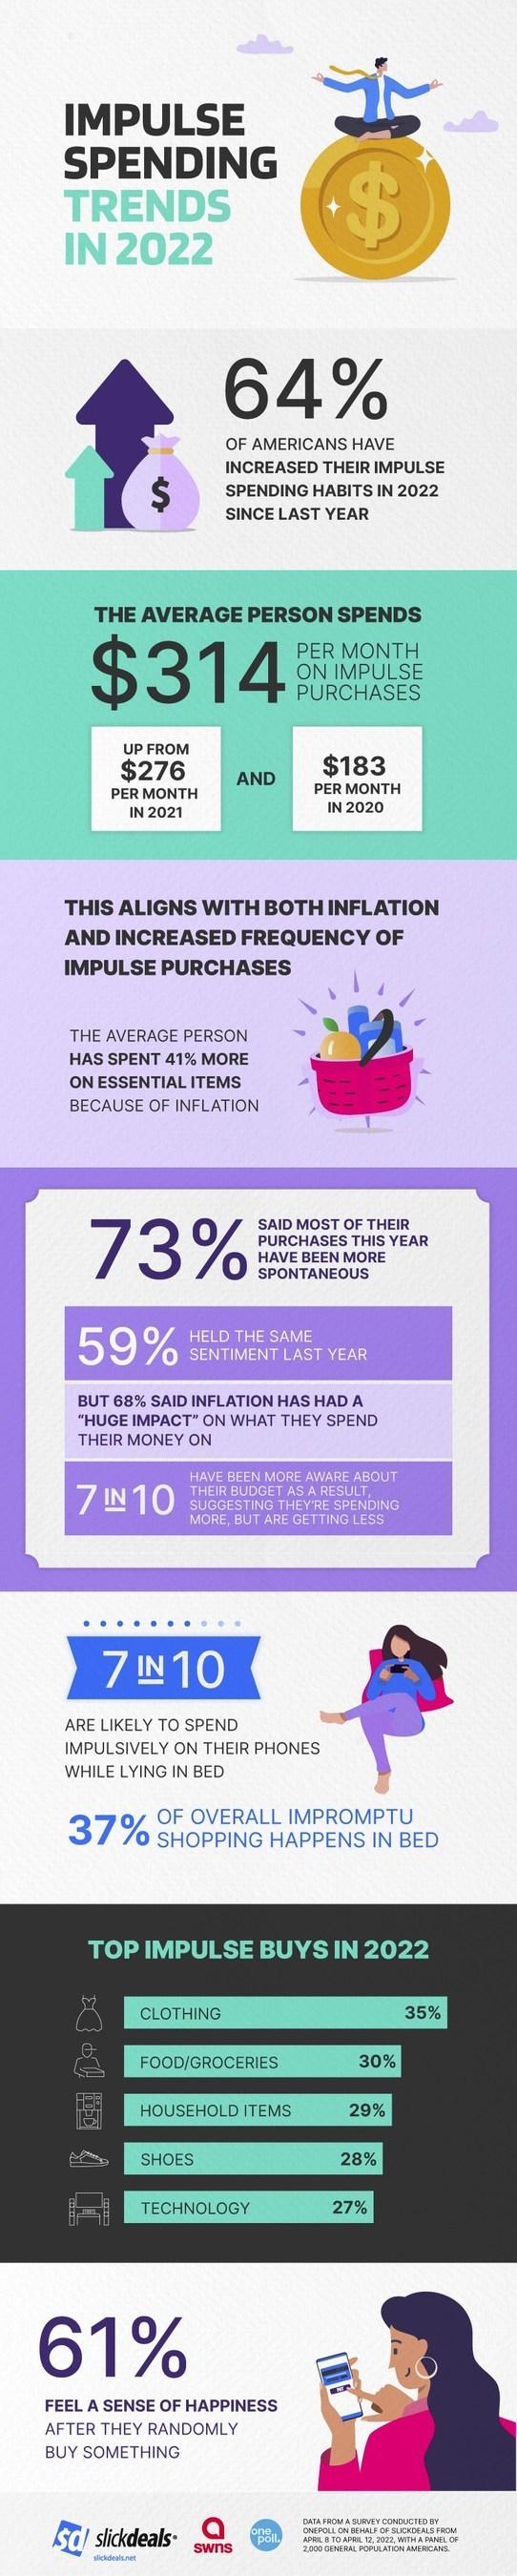 Slickdeals Spending Infographic More Than 7 in 10 Americans Make Impulse Purchases Regularly